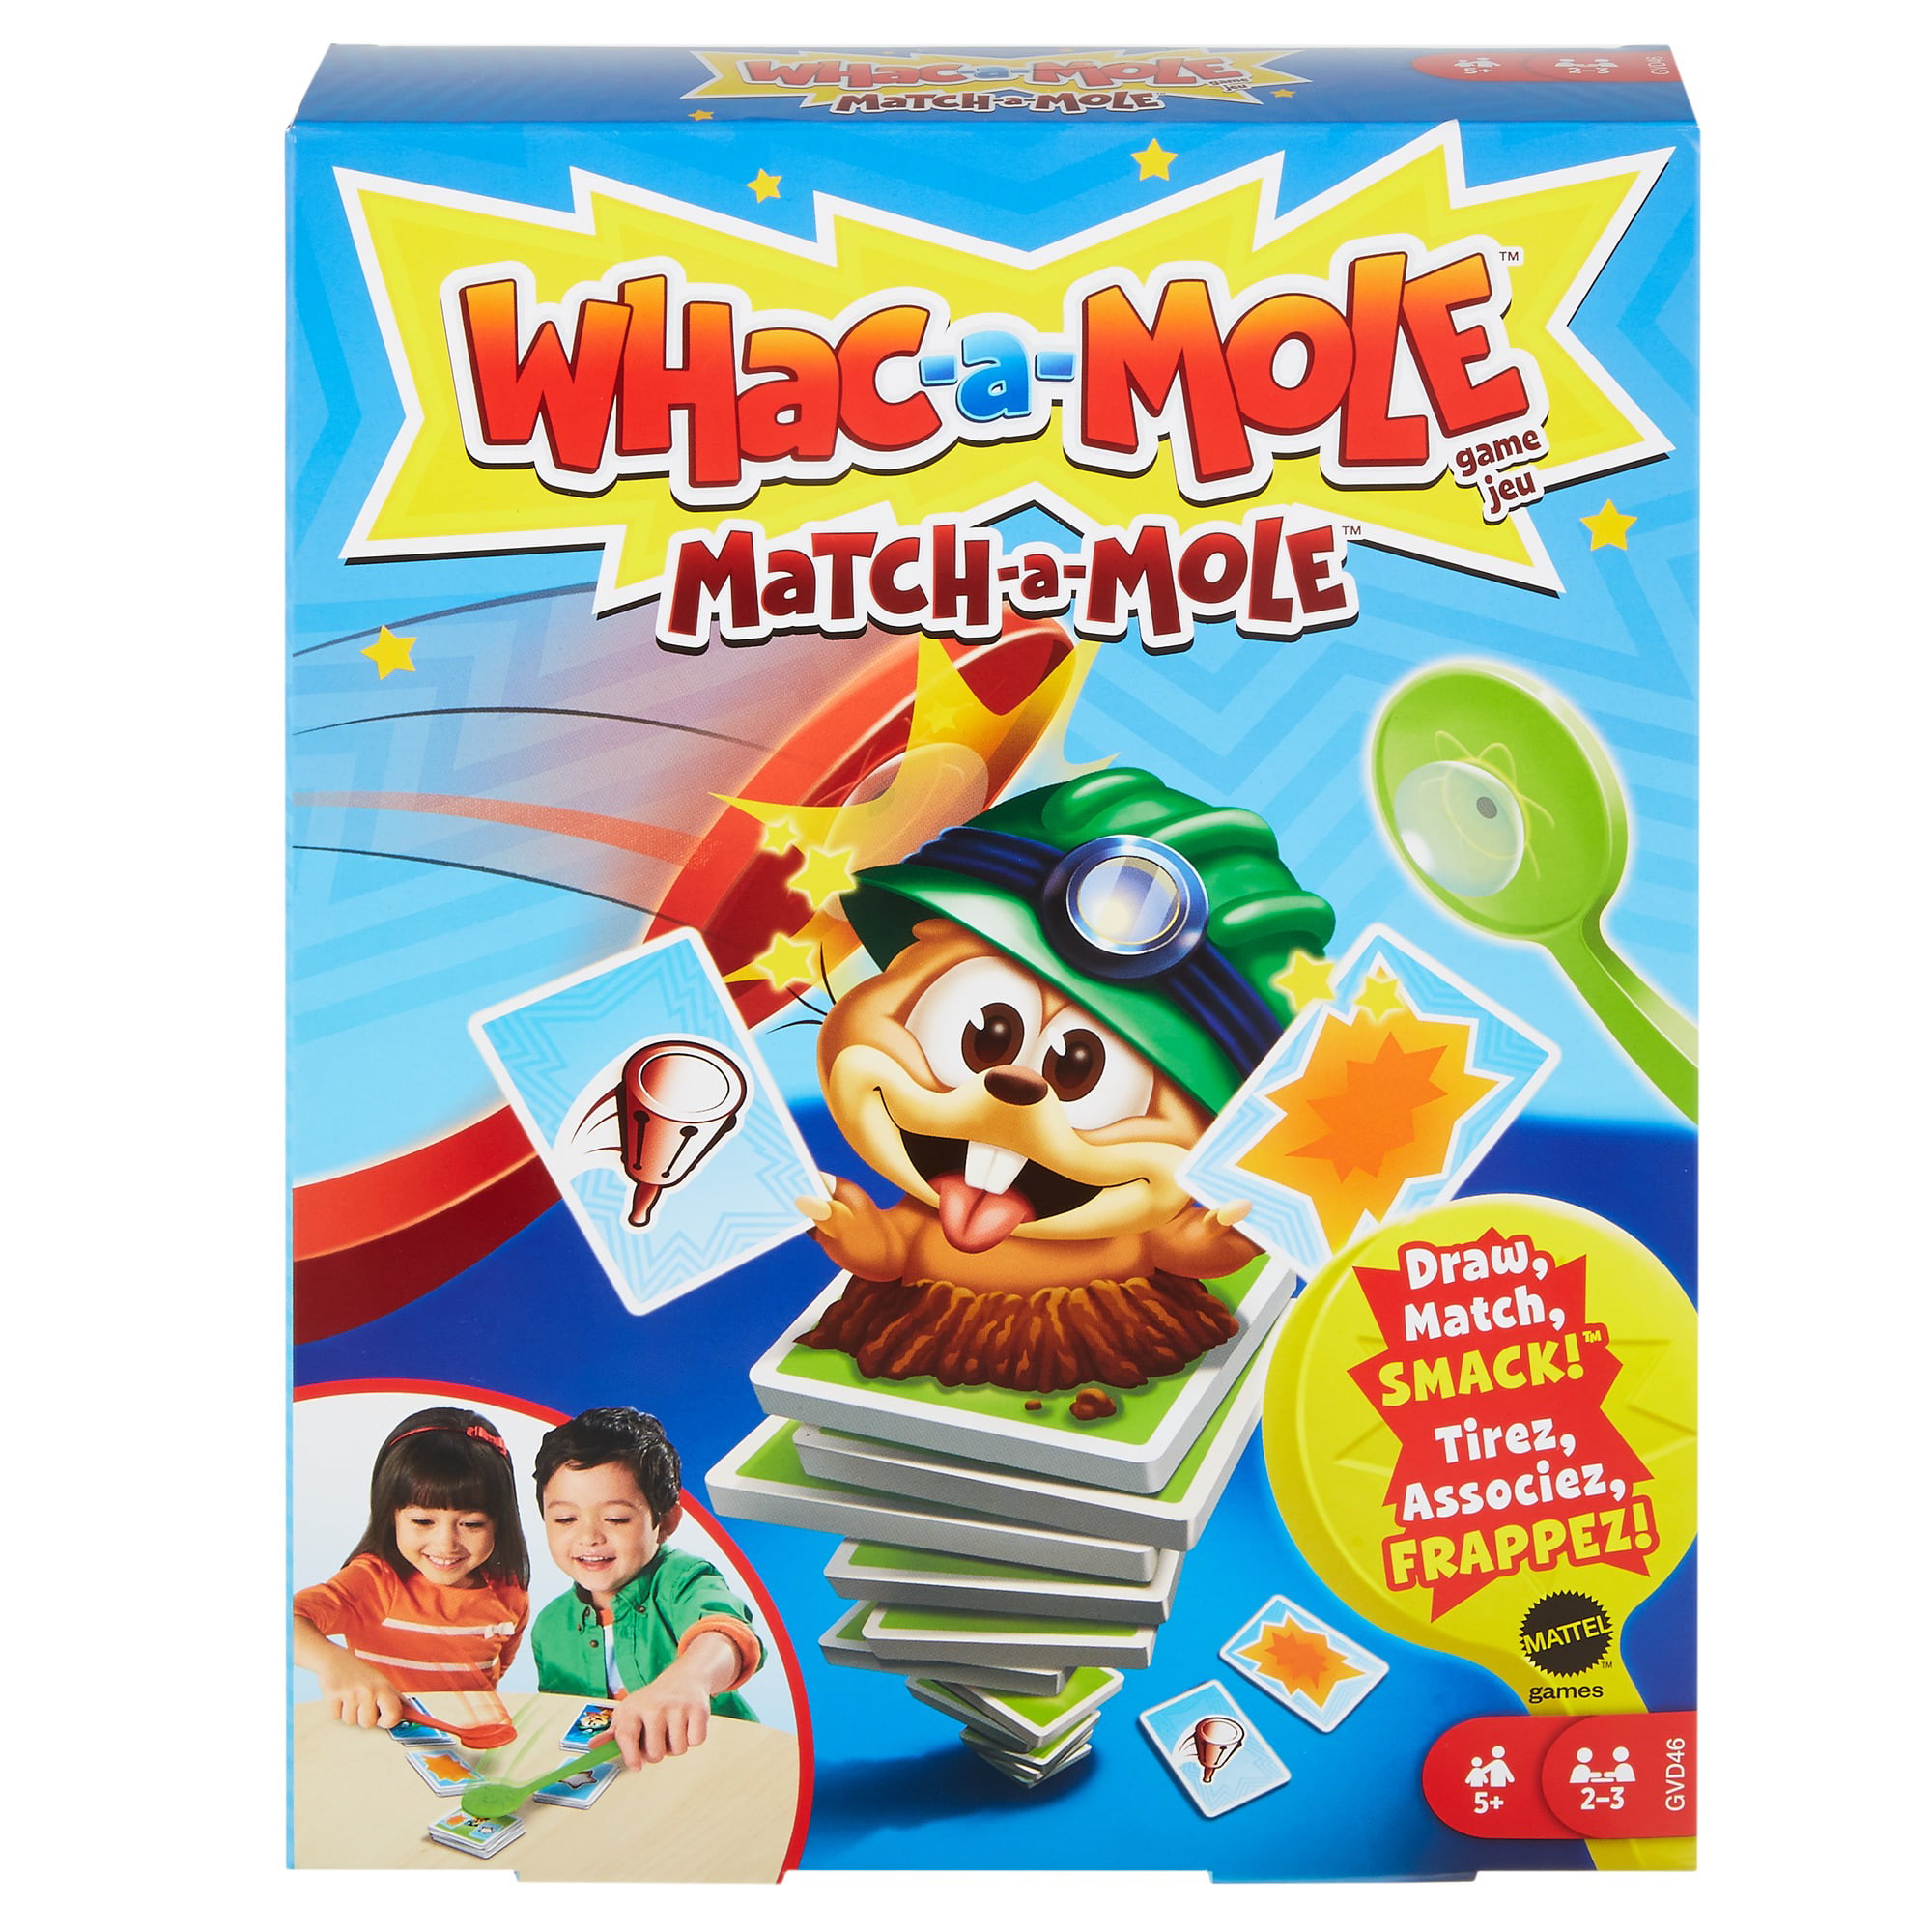 Whac-A-Mole Match-A-Mole Kids Card Game with Mole Smackers for 5 Year Old & Up